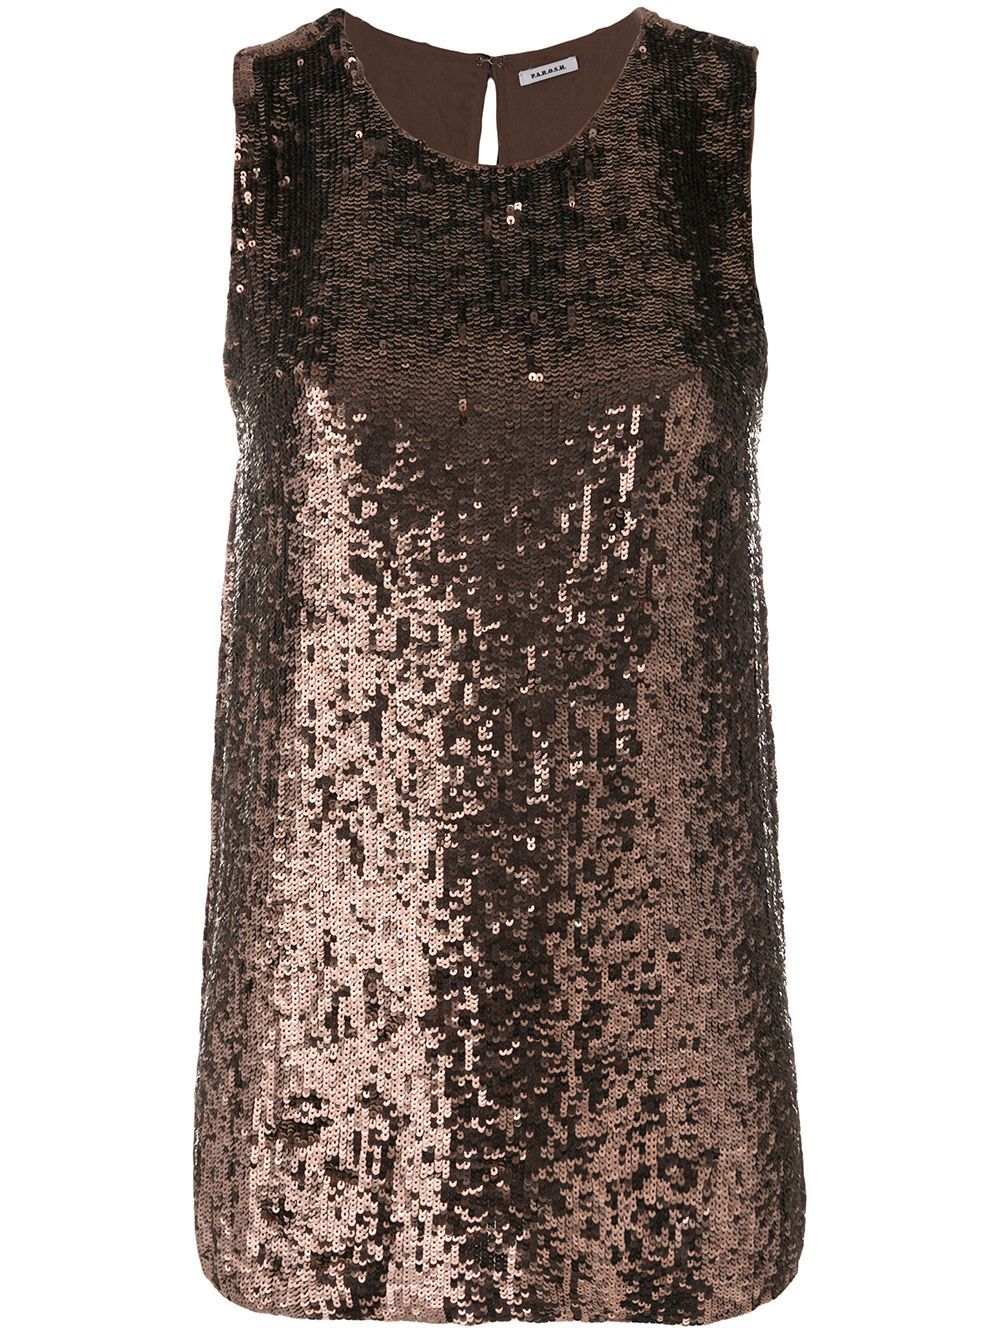 P.A.R.O.S.H. sequinned top - Brown | FarFetch US